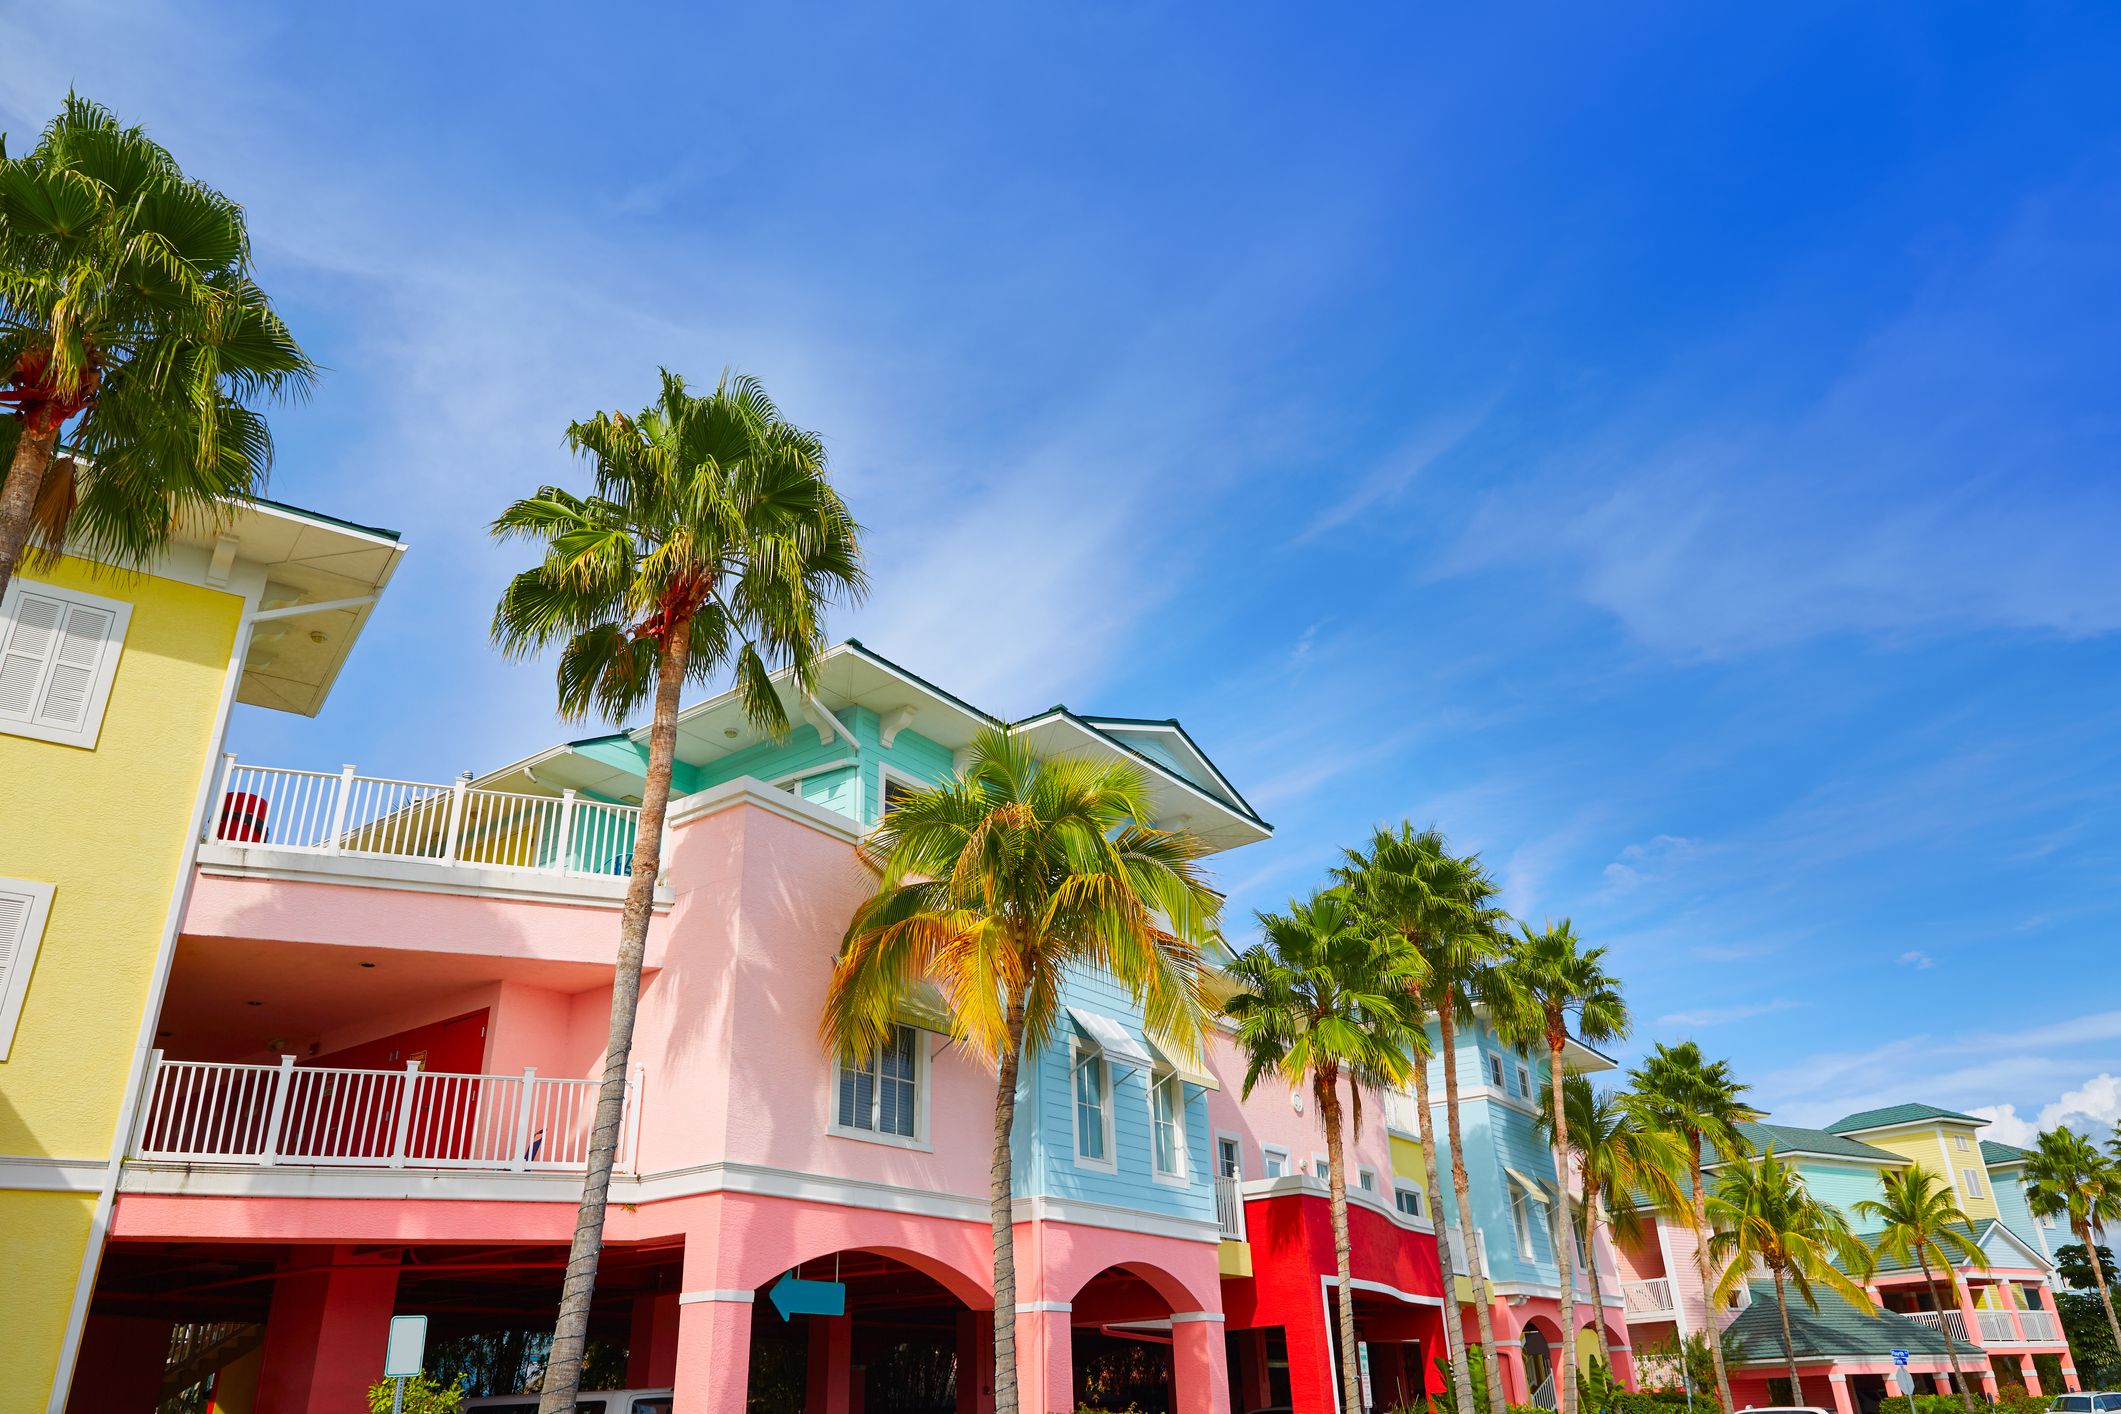 Florida Fort Myers colorful building facades and palm trees.